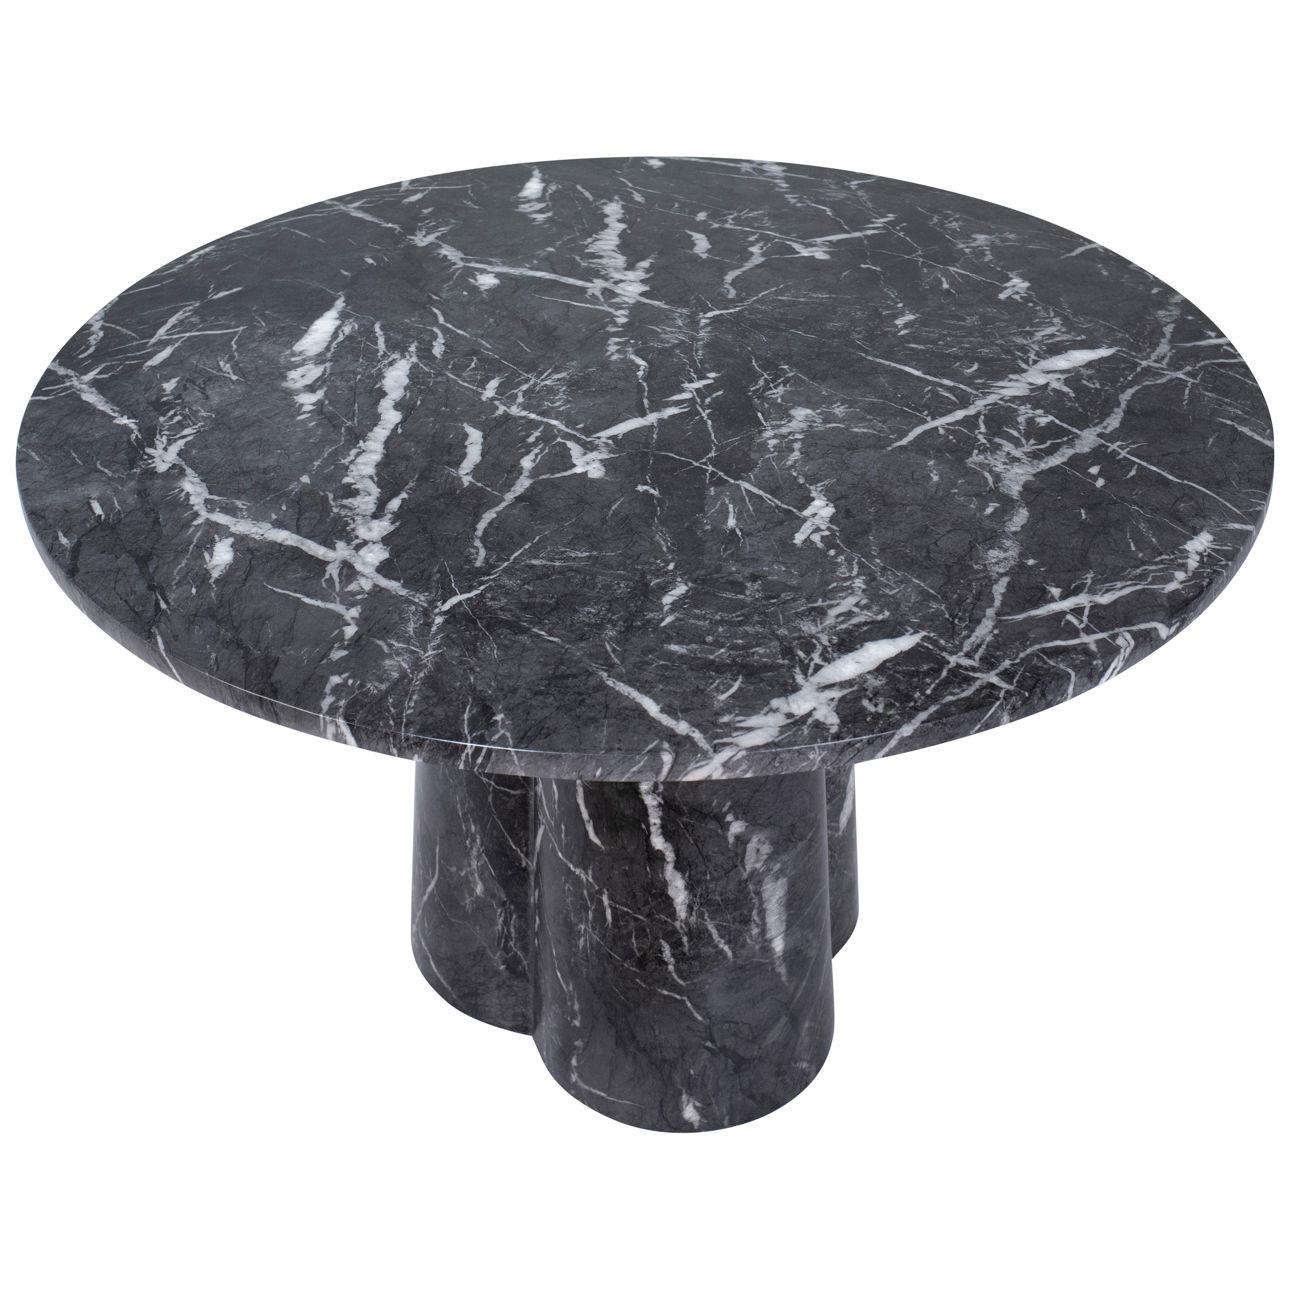 This dining table is crafted with black marble finished on concrete using a water transfer technique that highlights captivating white veins. Its round shape sits elegantly atop a robust pedestal base, combining contemporary aesthetics with